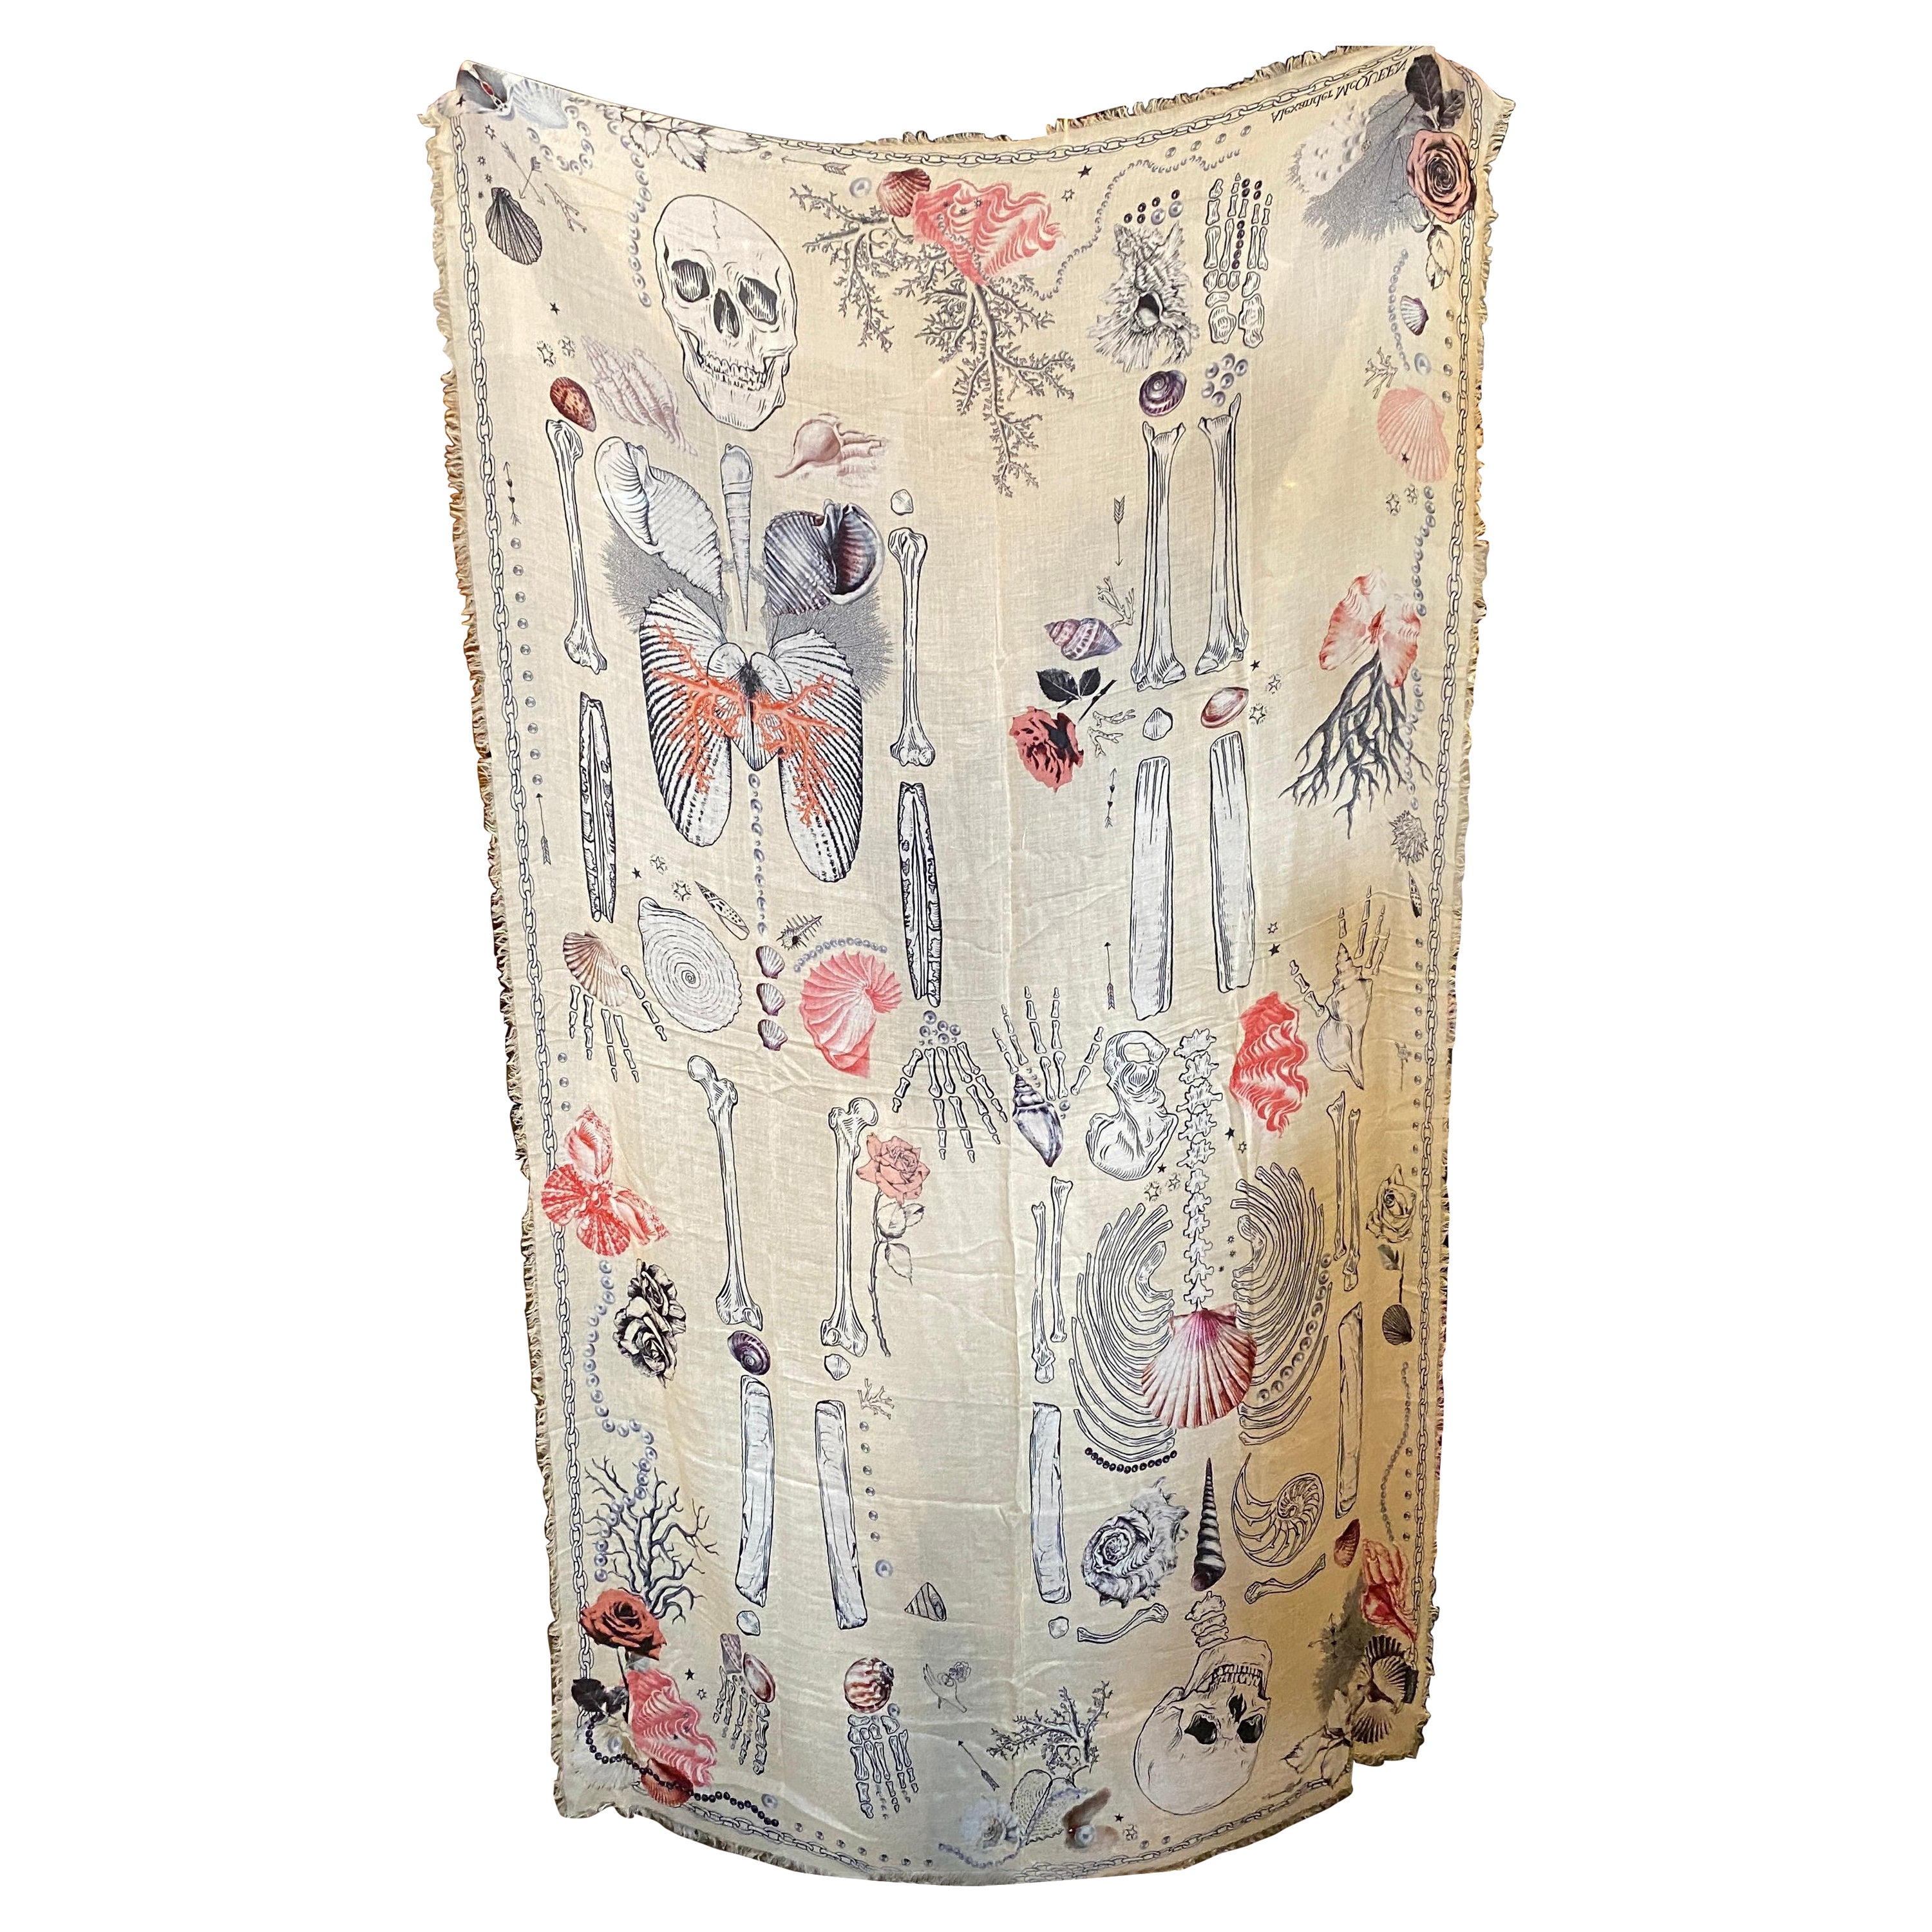  An Iconic White Silk Scarf with double Skull by Alexander McQueen